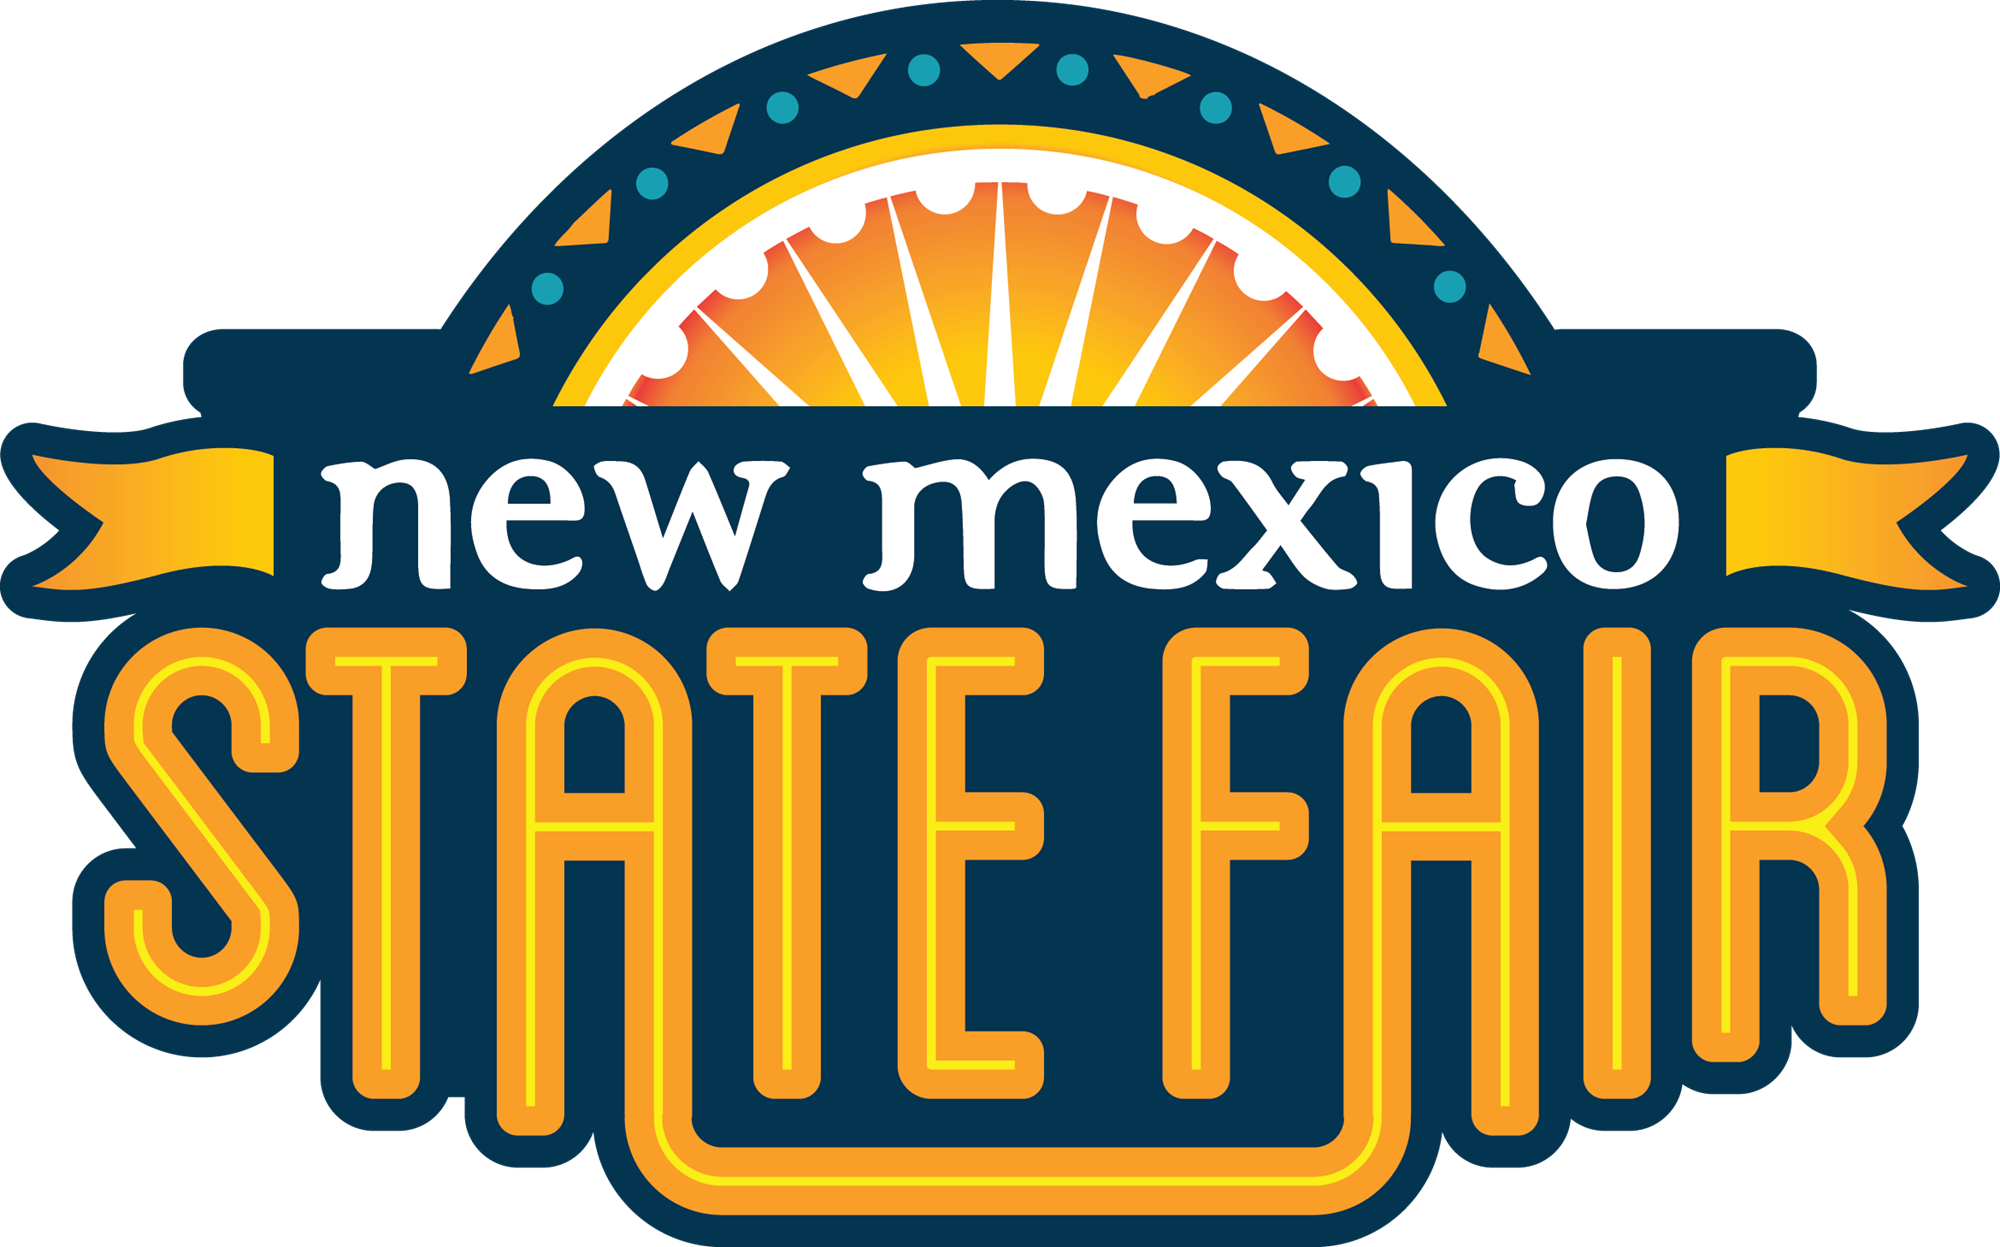 The Mega Pass is available for New Mexico State Fair